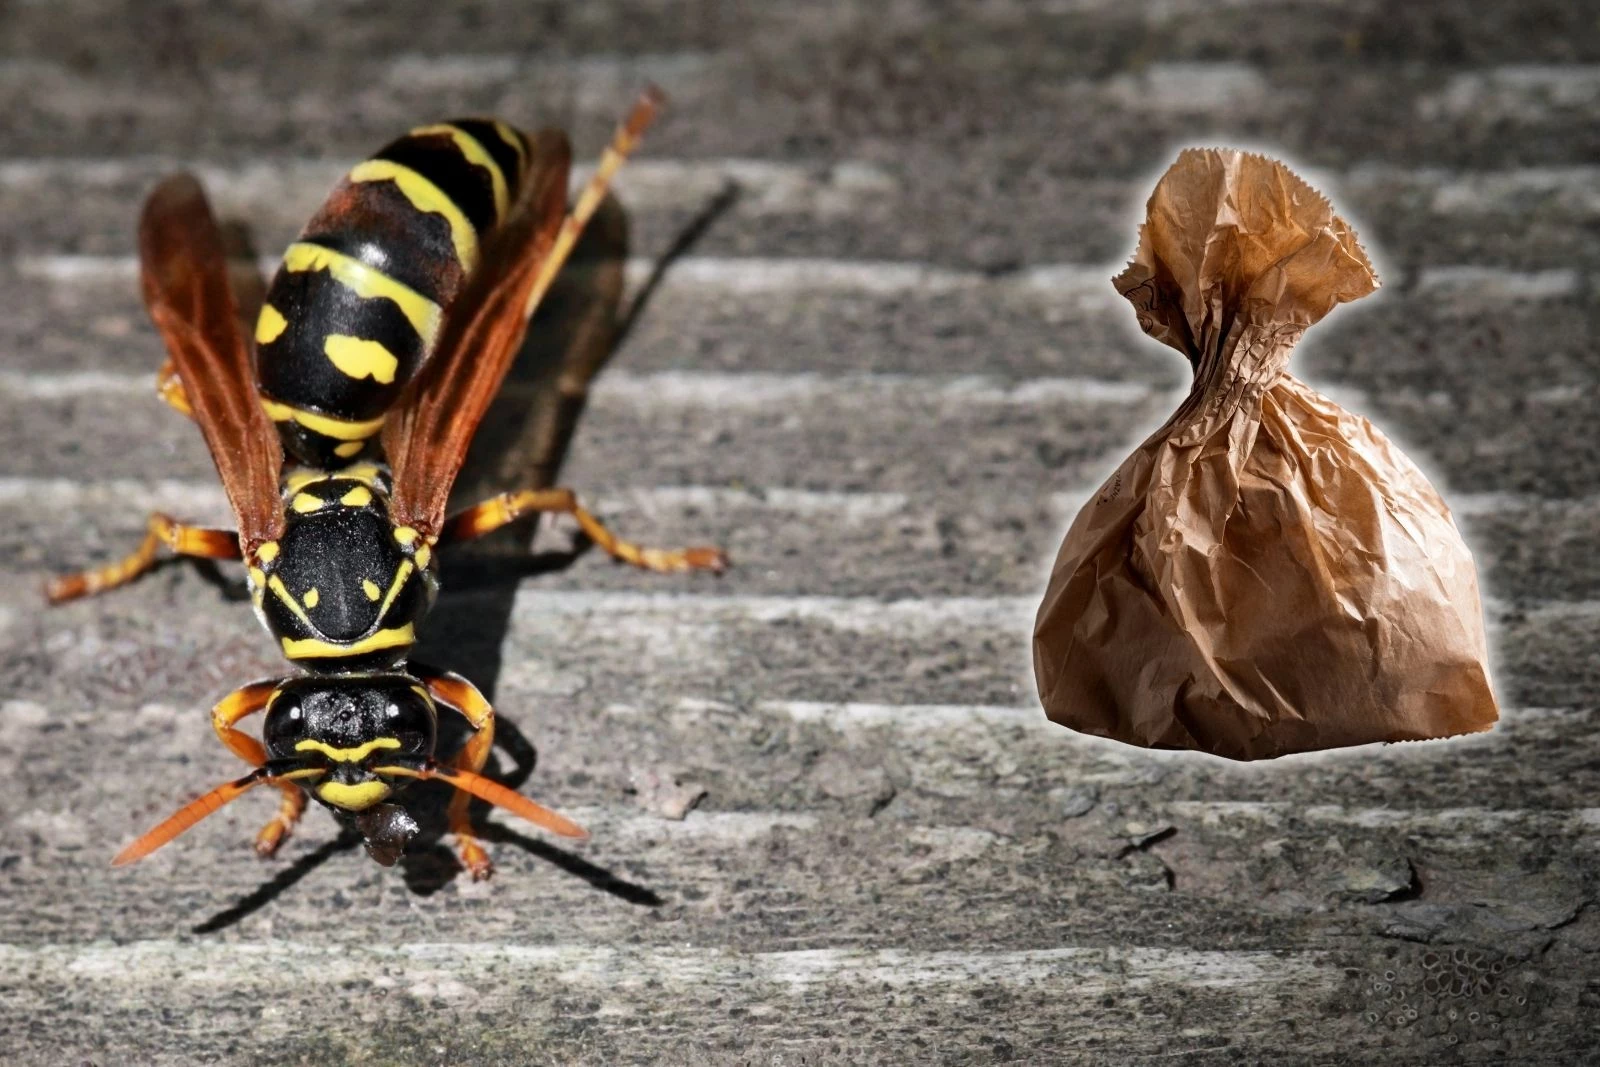 How To Keep Away Bees Simple Trick to Keep Wasps and Bees Away from Your Yard